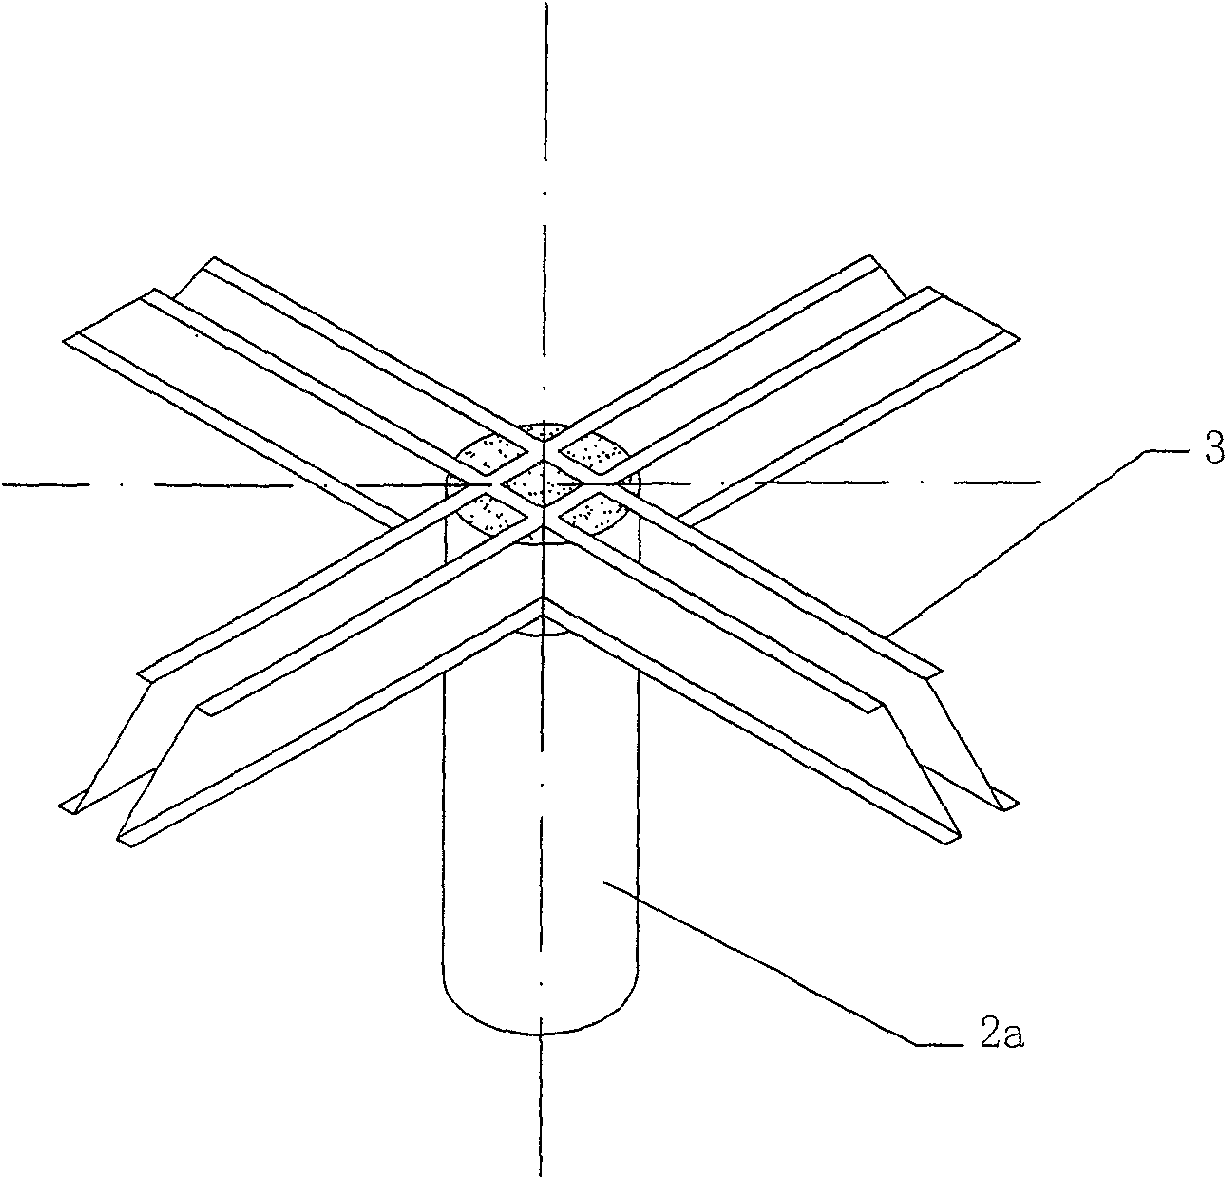 Ring type steel corbel node for beam-free building cover connection reinforced concrete post